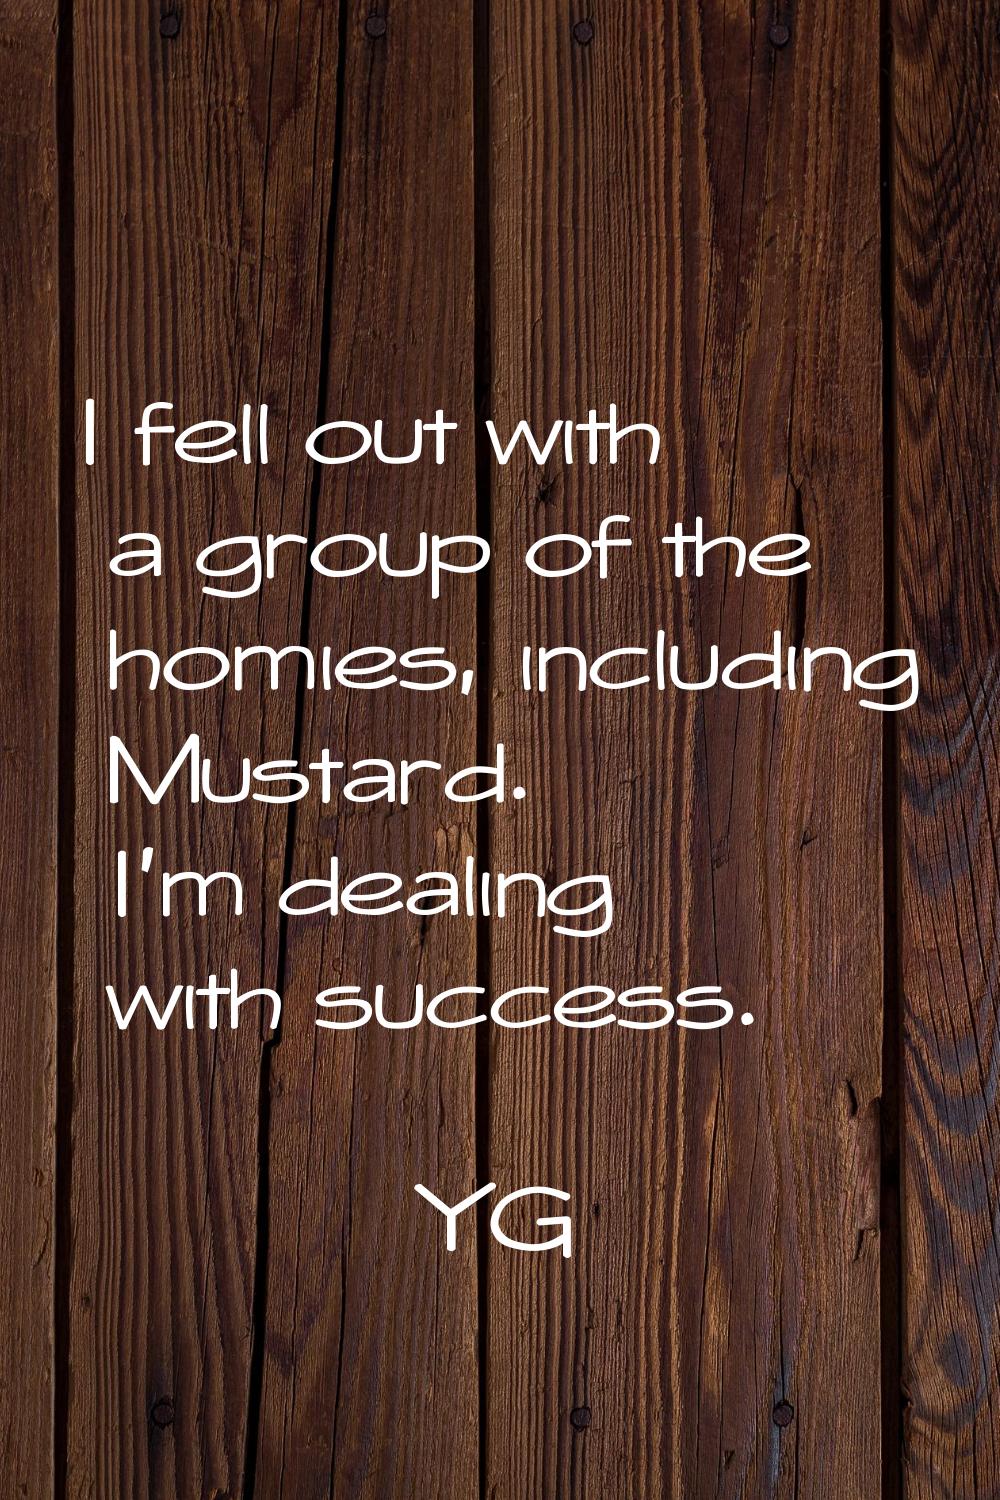 I fell out with a group of the homies, including Mustard. I'm dealing with success.